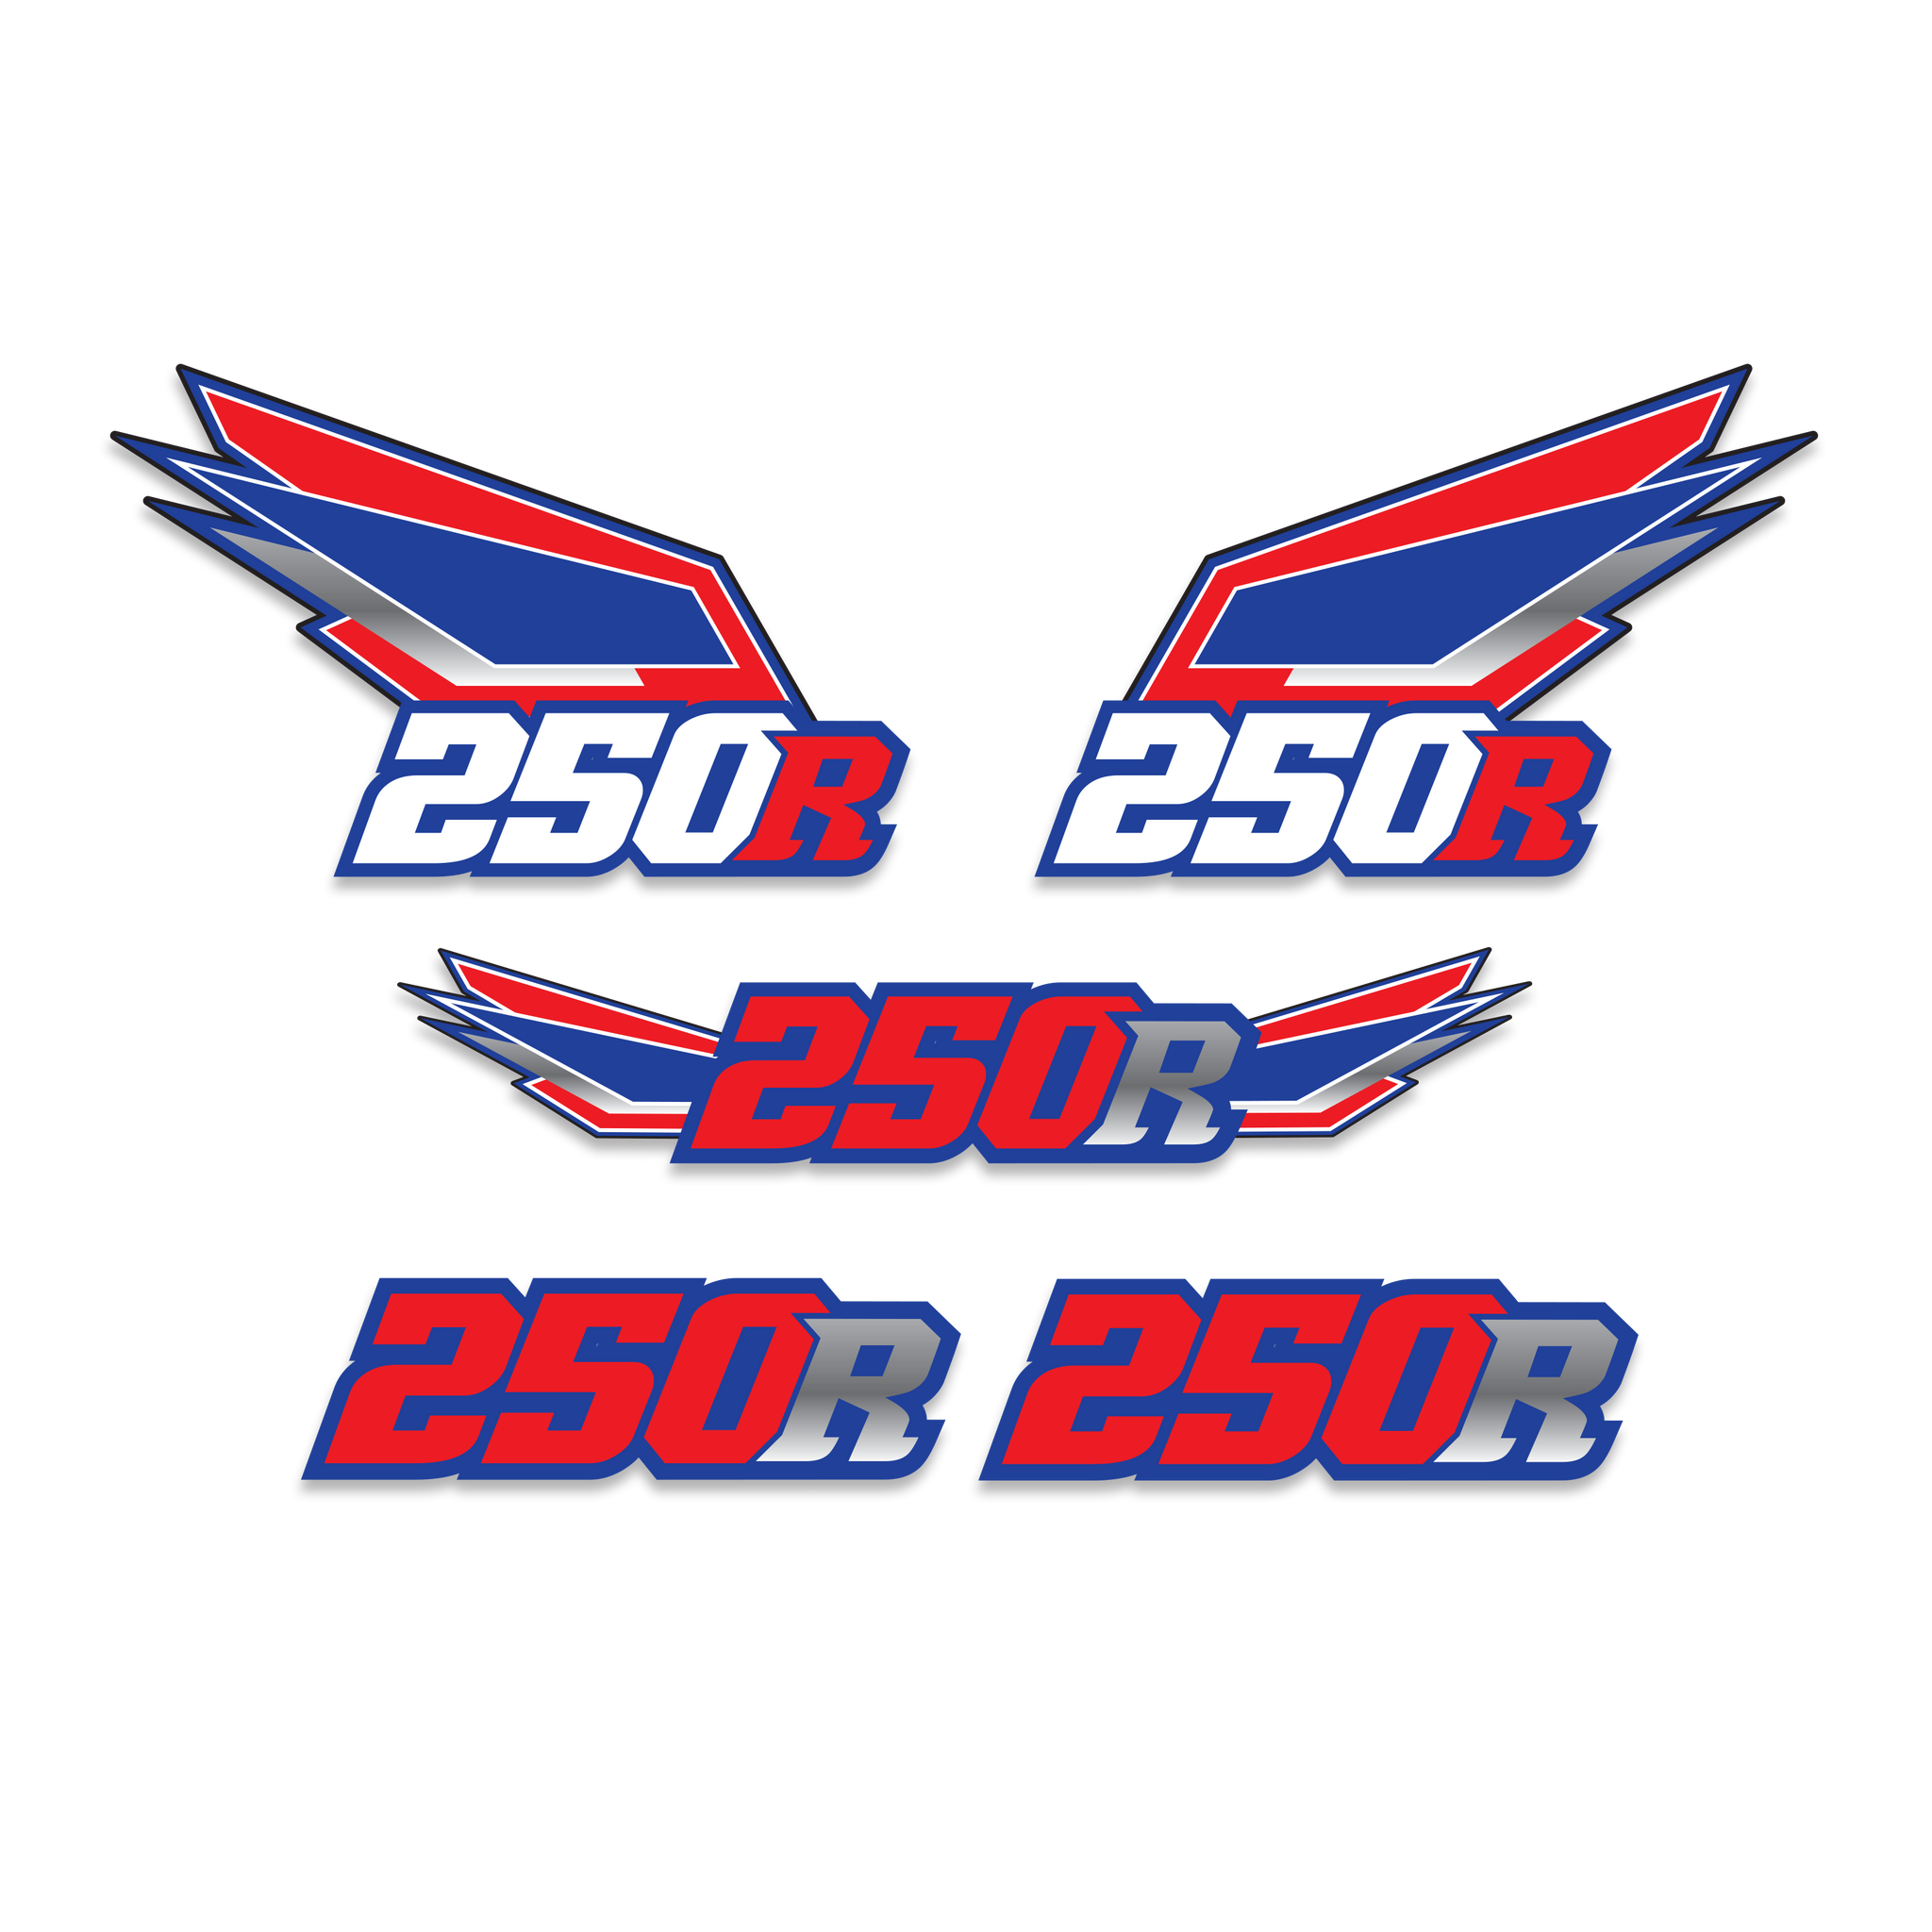 1986 ATC 250R Strike Decal Graphics Kit - Assorted Colors